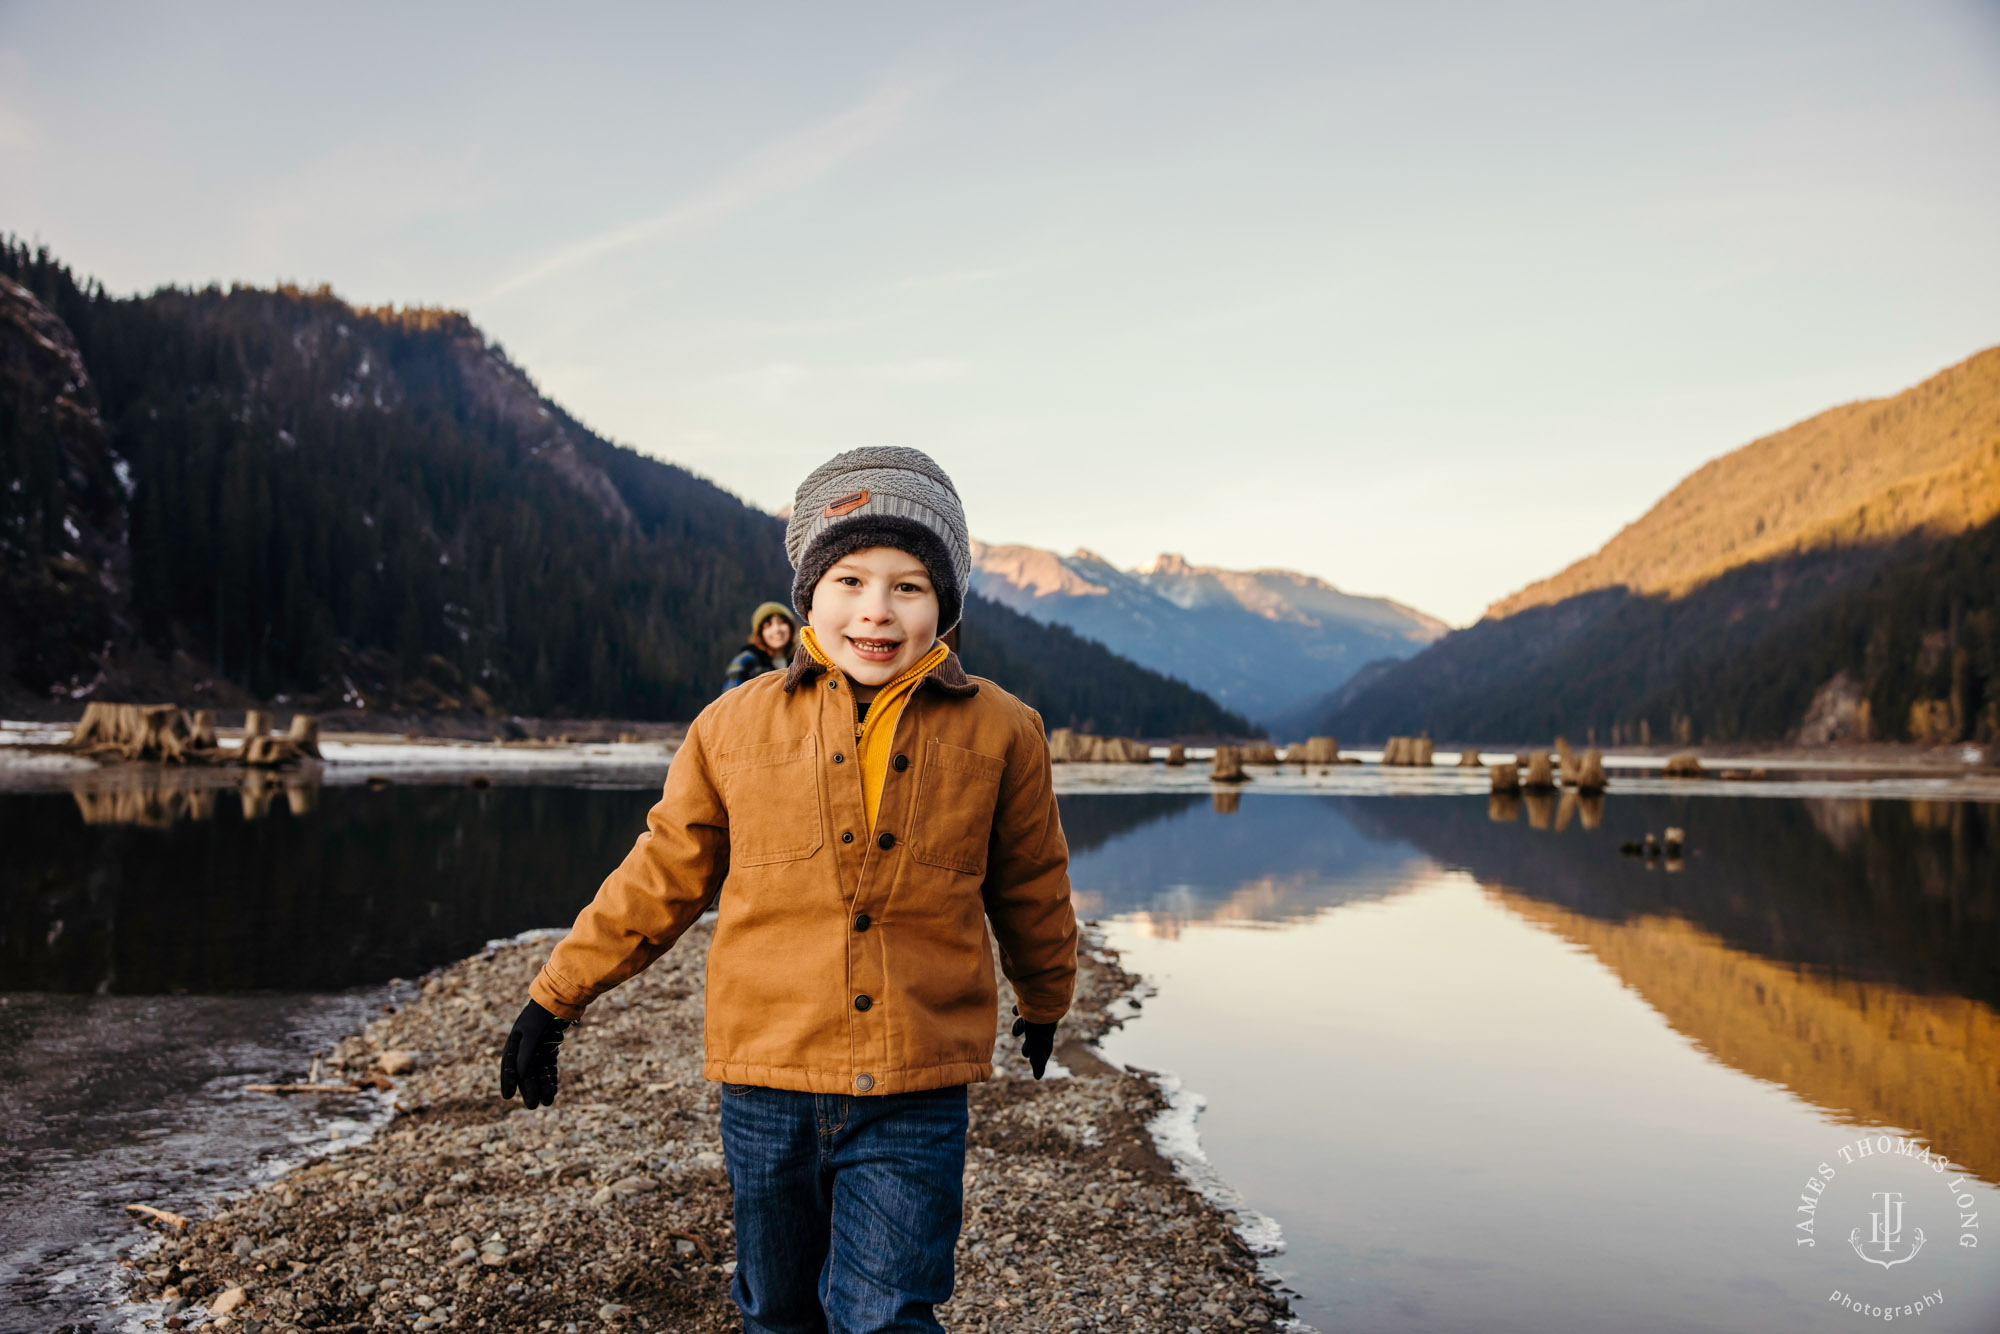 Adventure family photography session in the Cascade Mountains by Snoqualmie and North Bend adventure family photographer James Thomas Long Photography